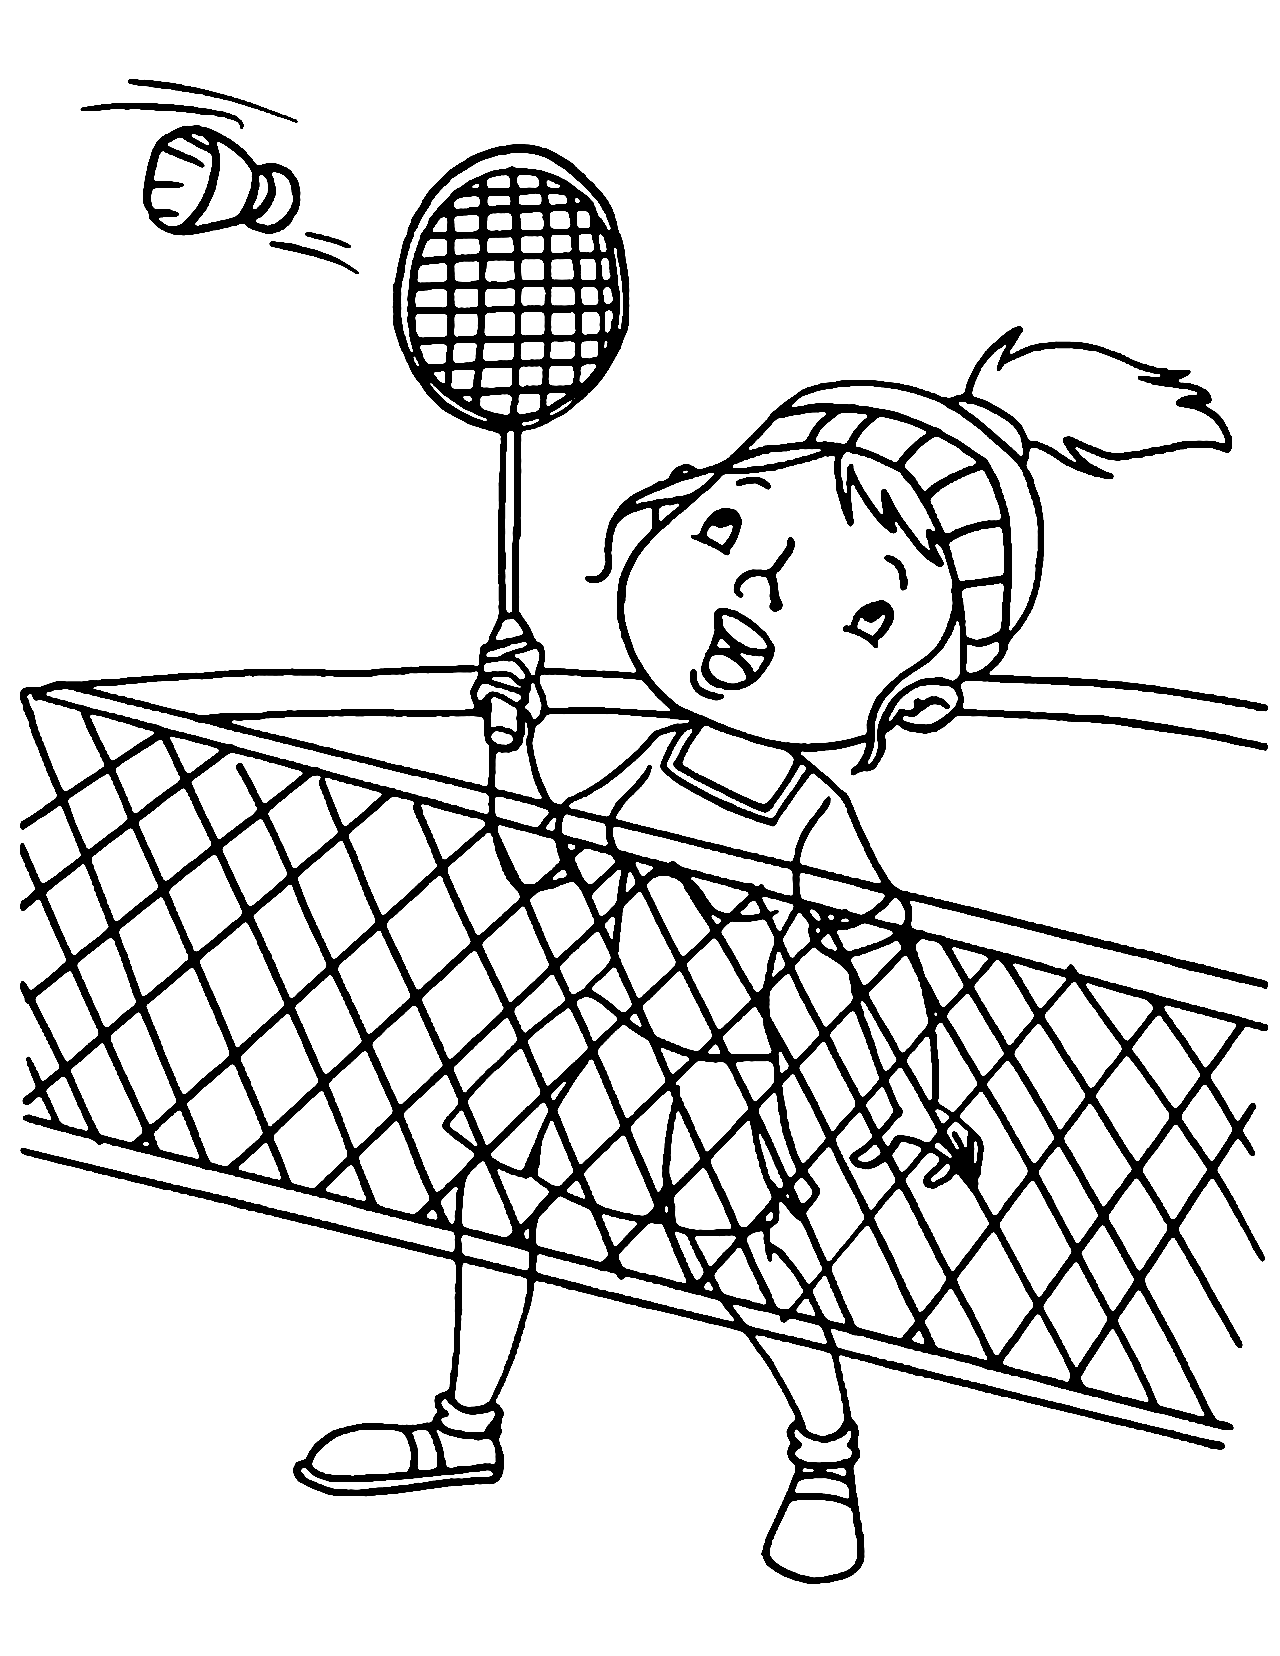 fun racketlhon coloring pages